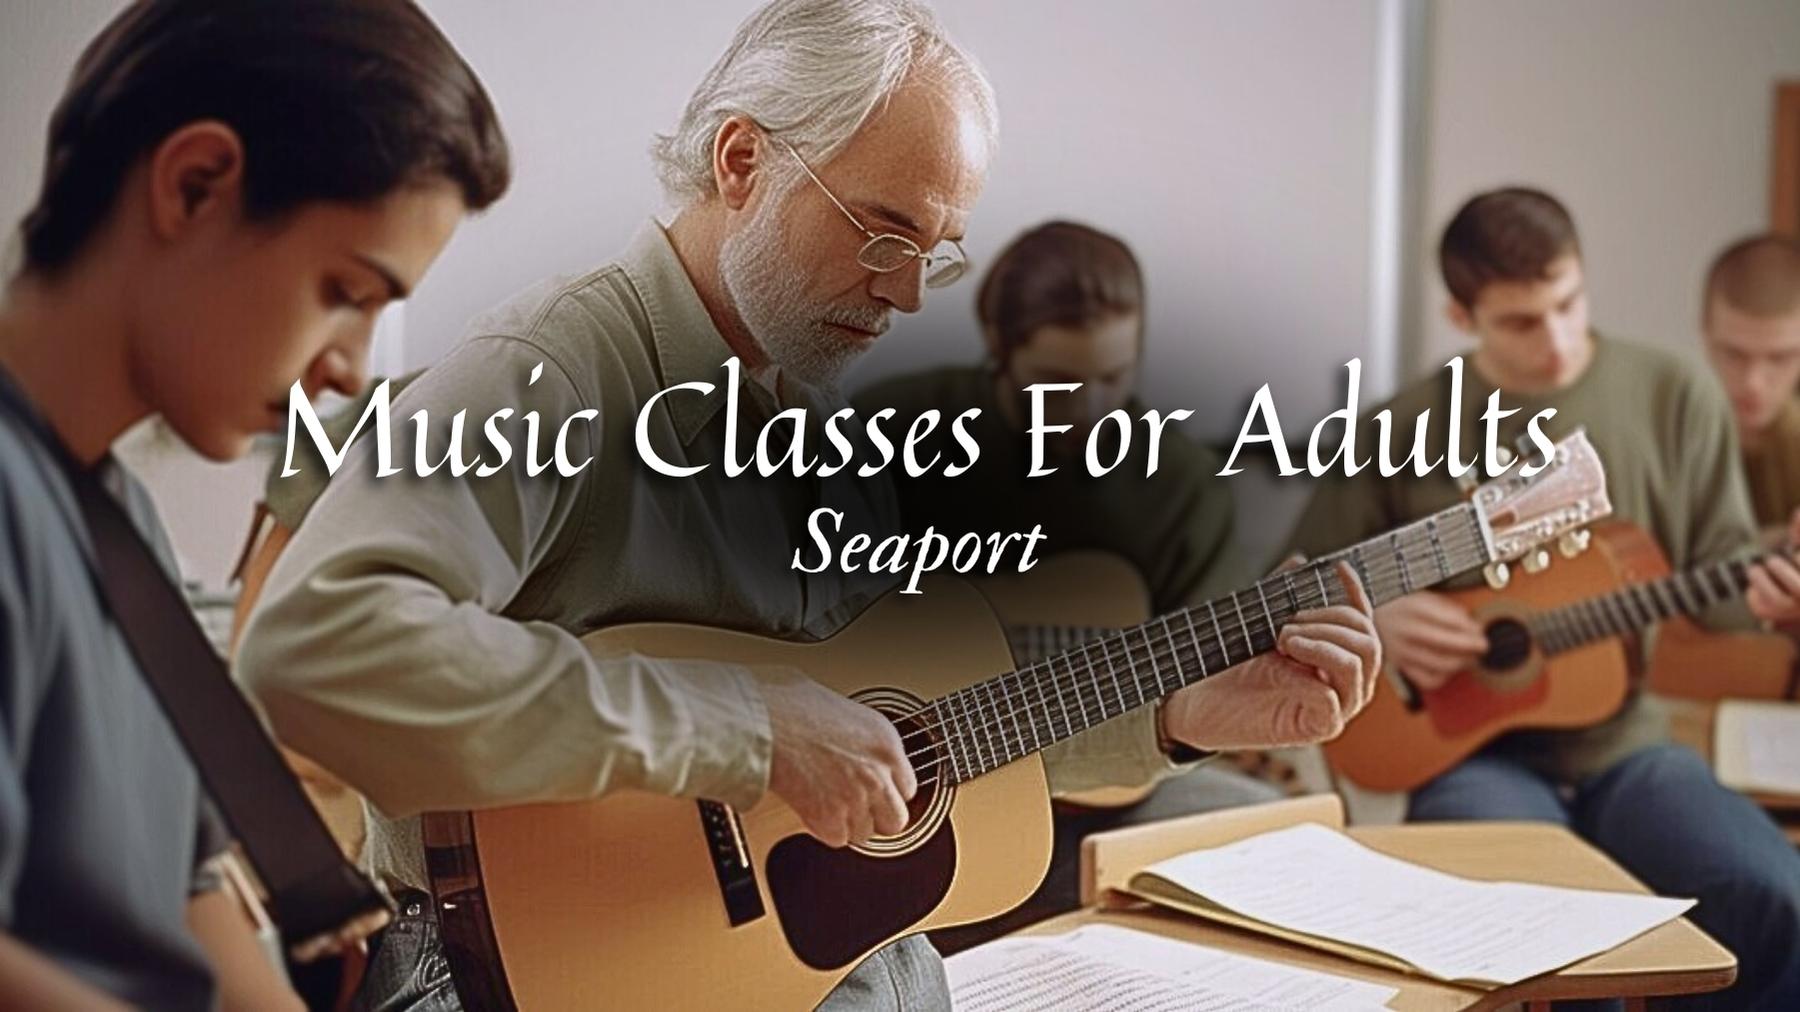 Music Classes for Adults in Seaport, Massachusetts: Unlock Your Musical Potential at Musicians Playground